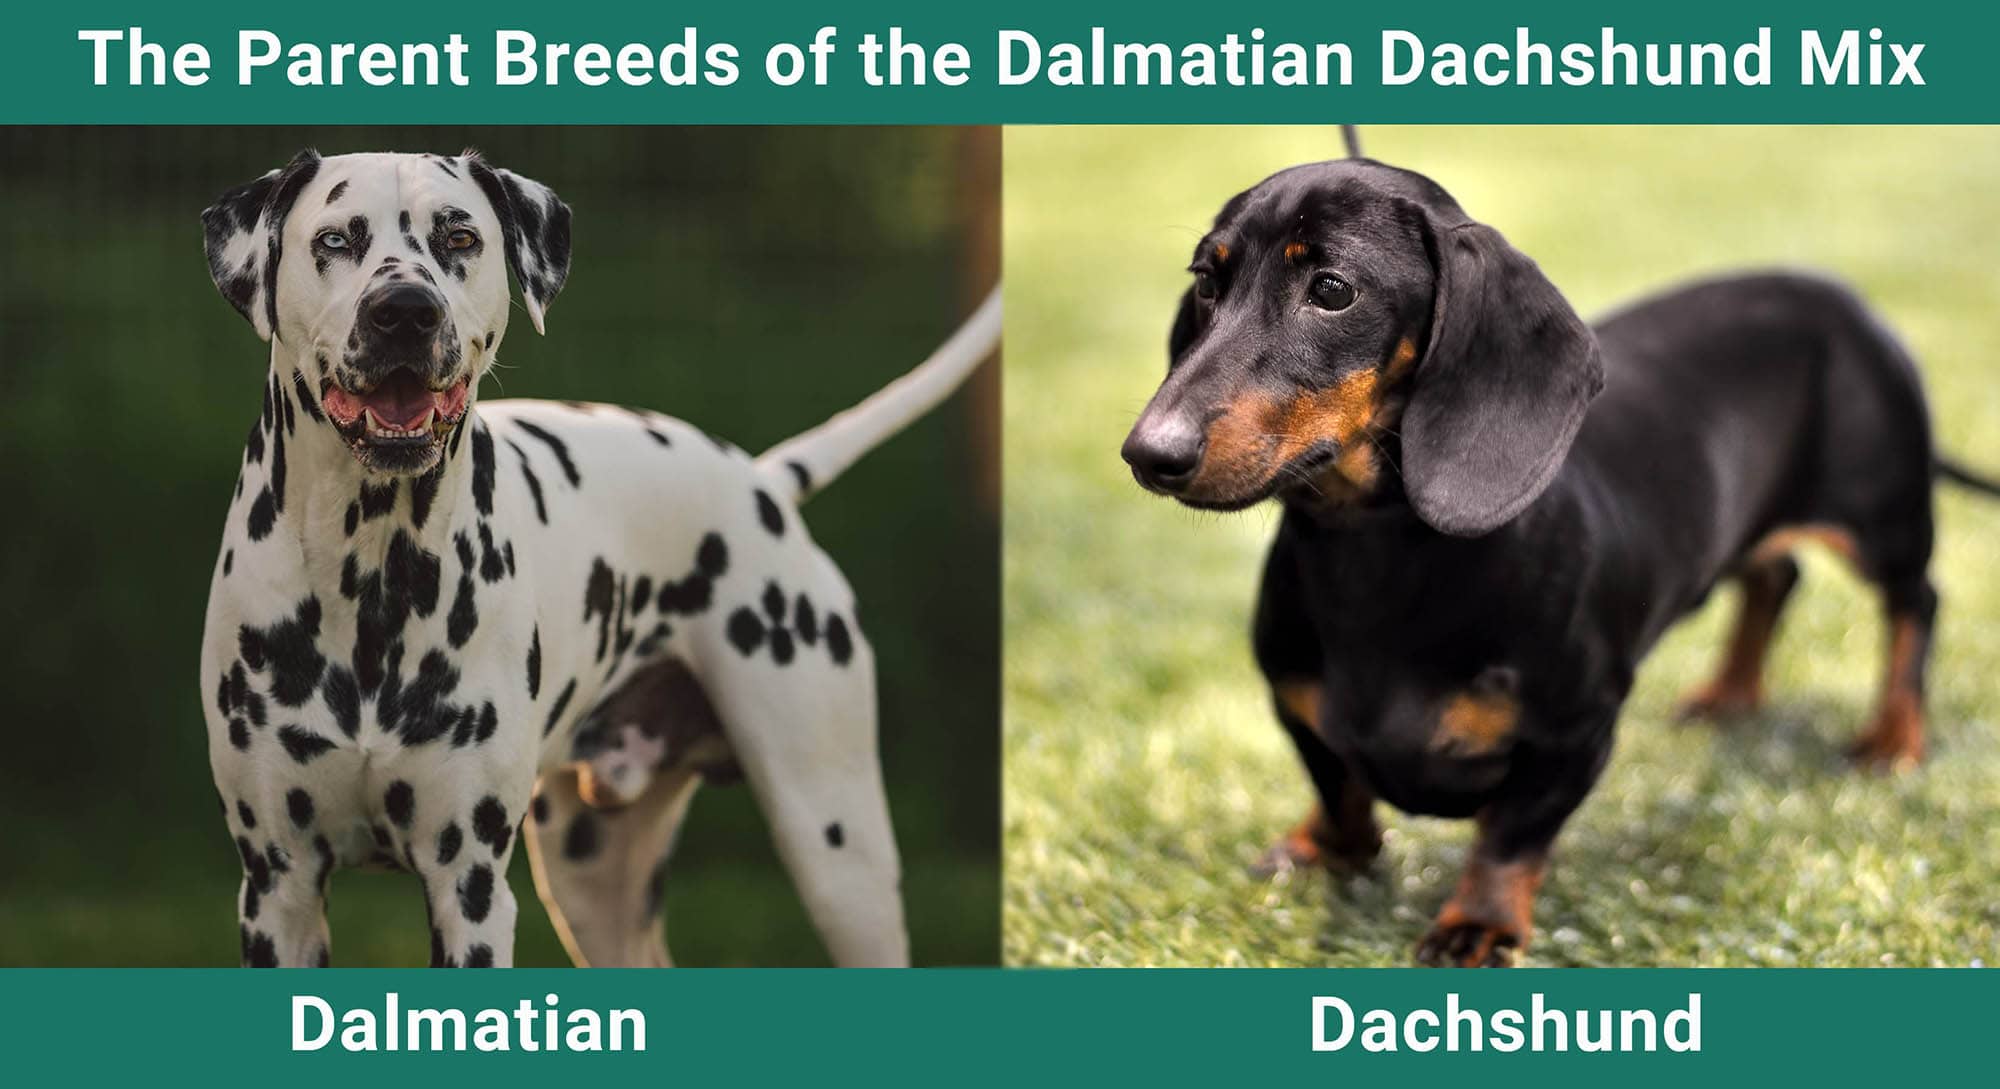 The Parent Breeds of the Dalmatian Dachshund Mix